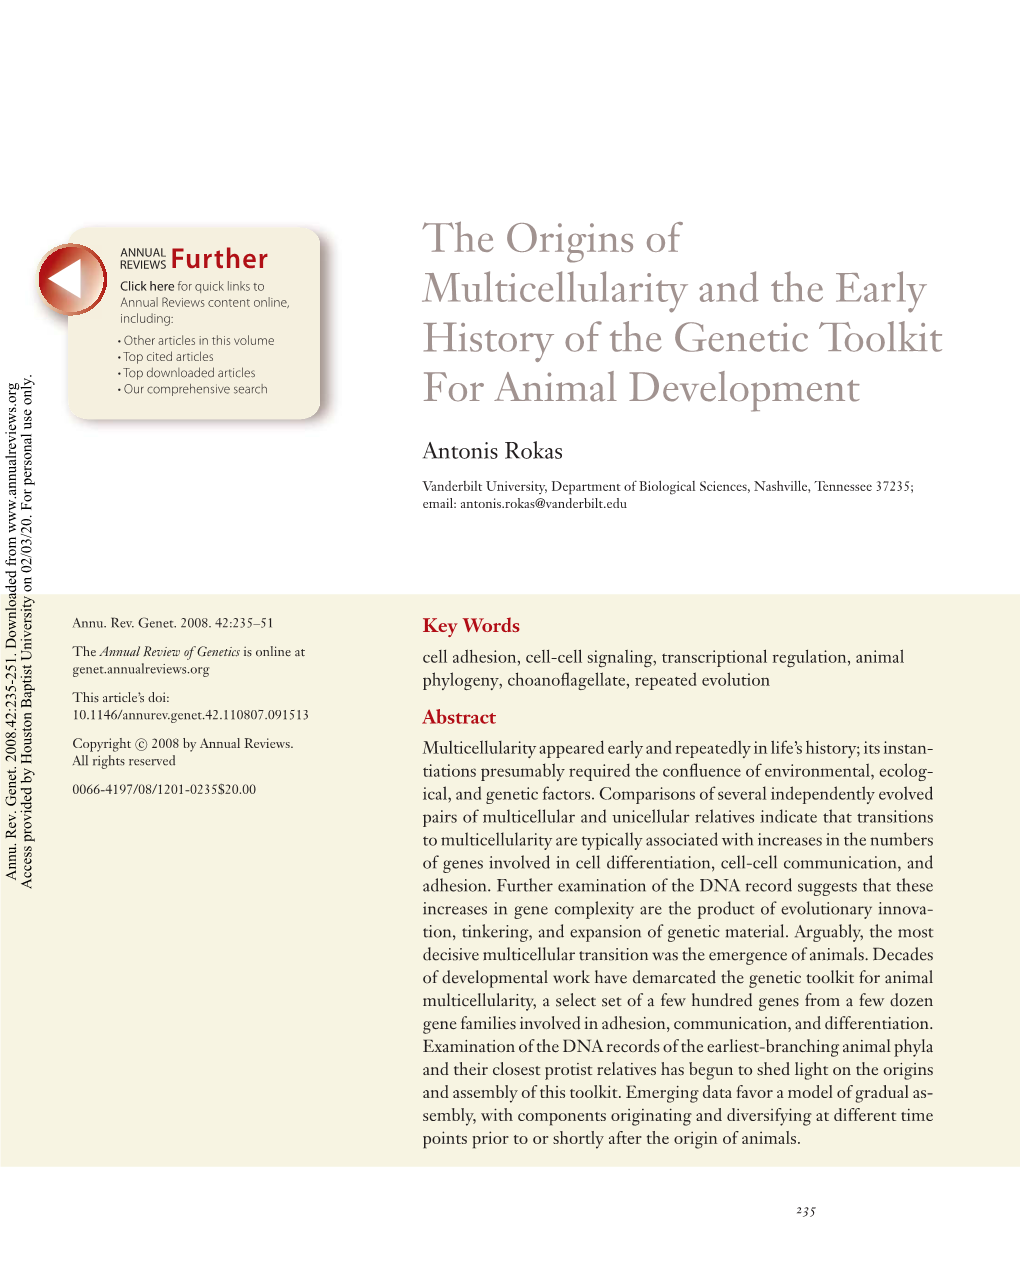 The Origins of Multicellularity and the Early History of the Genetic Toolkit